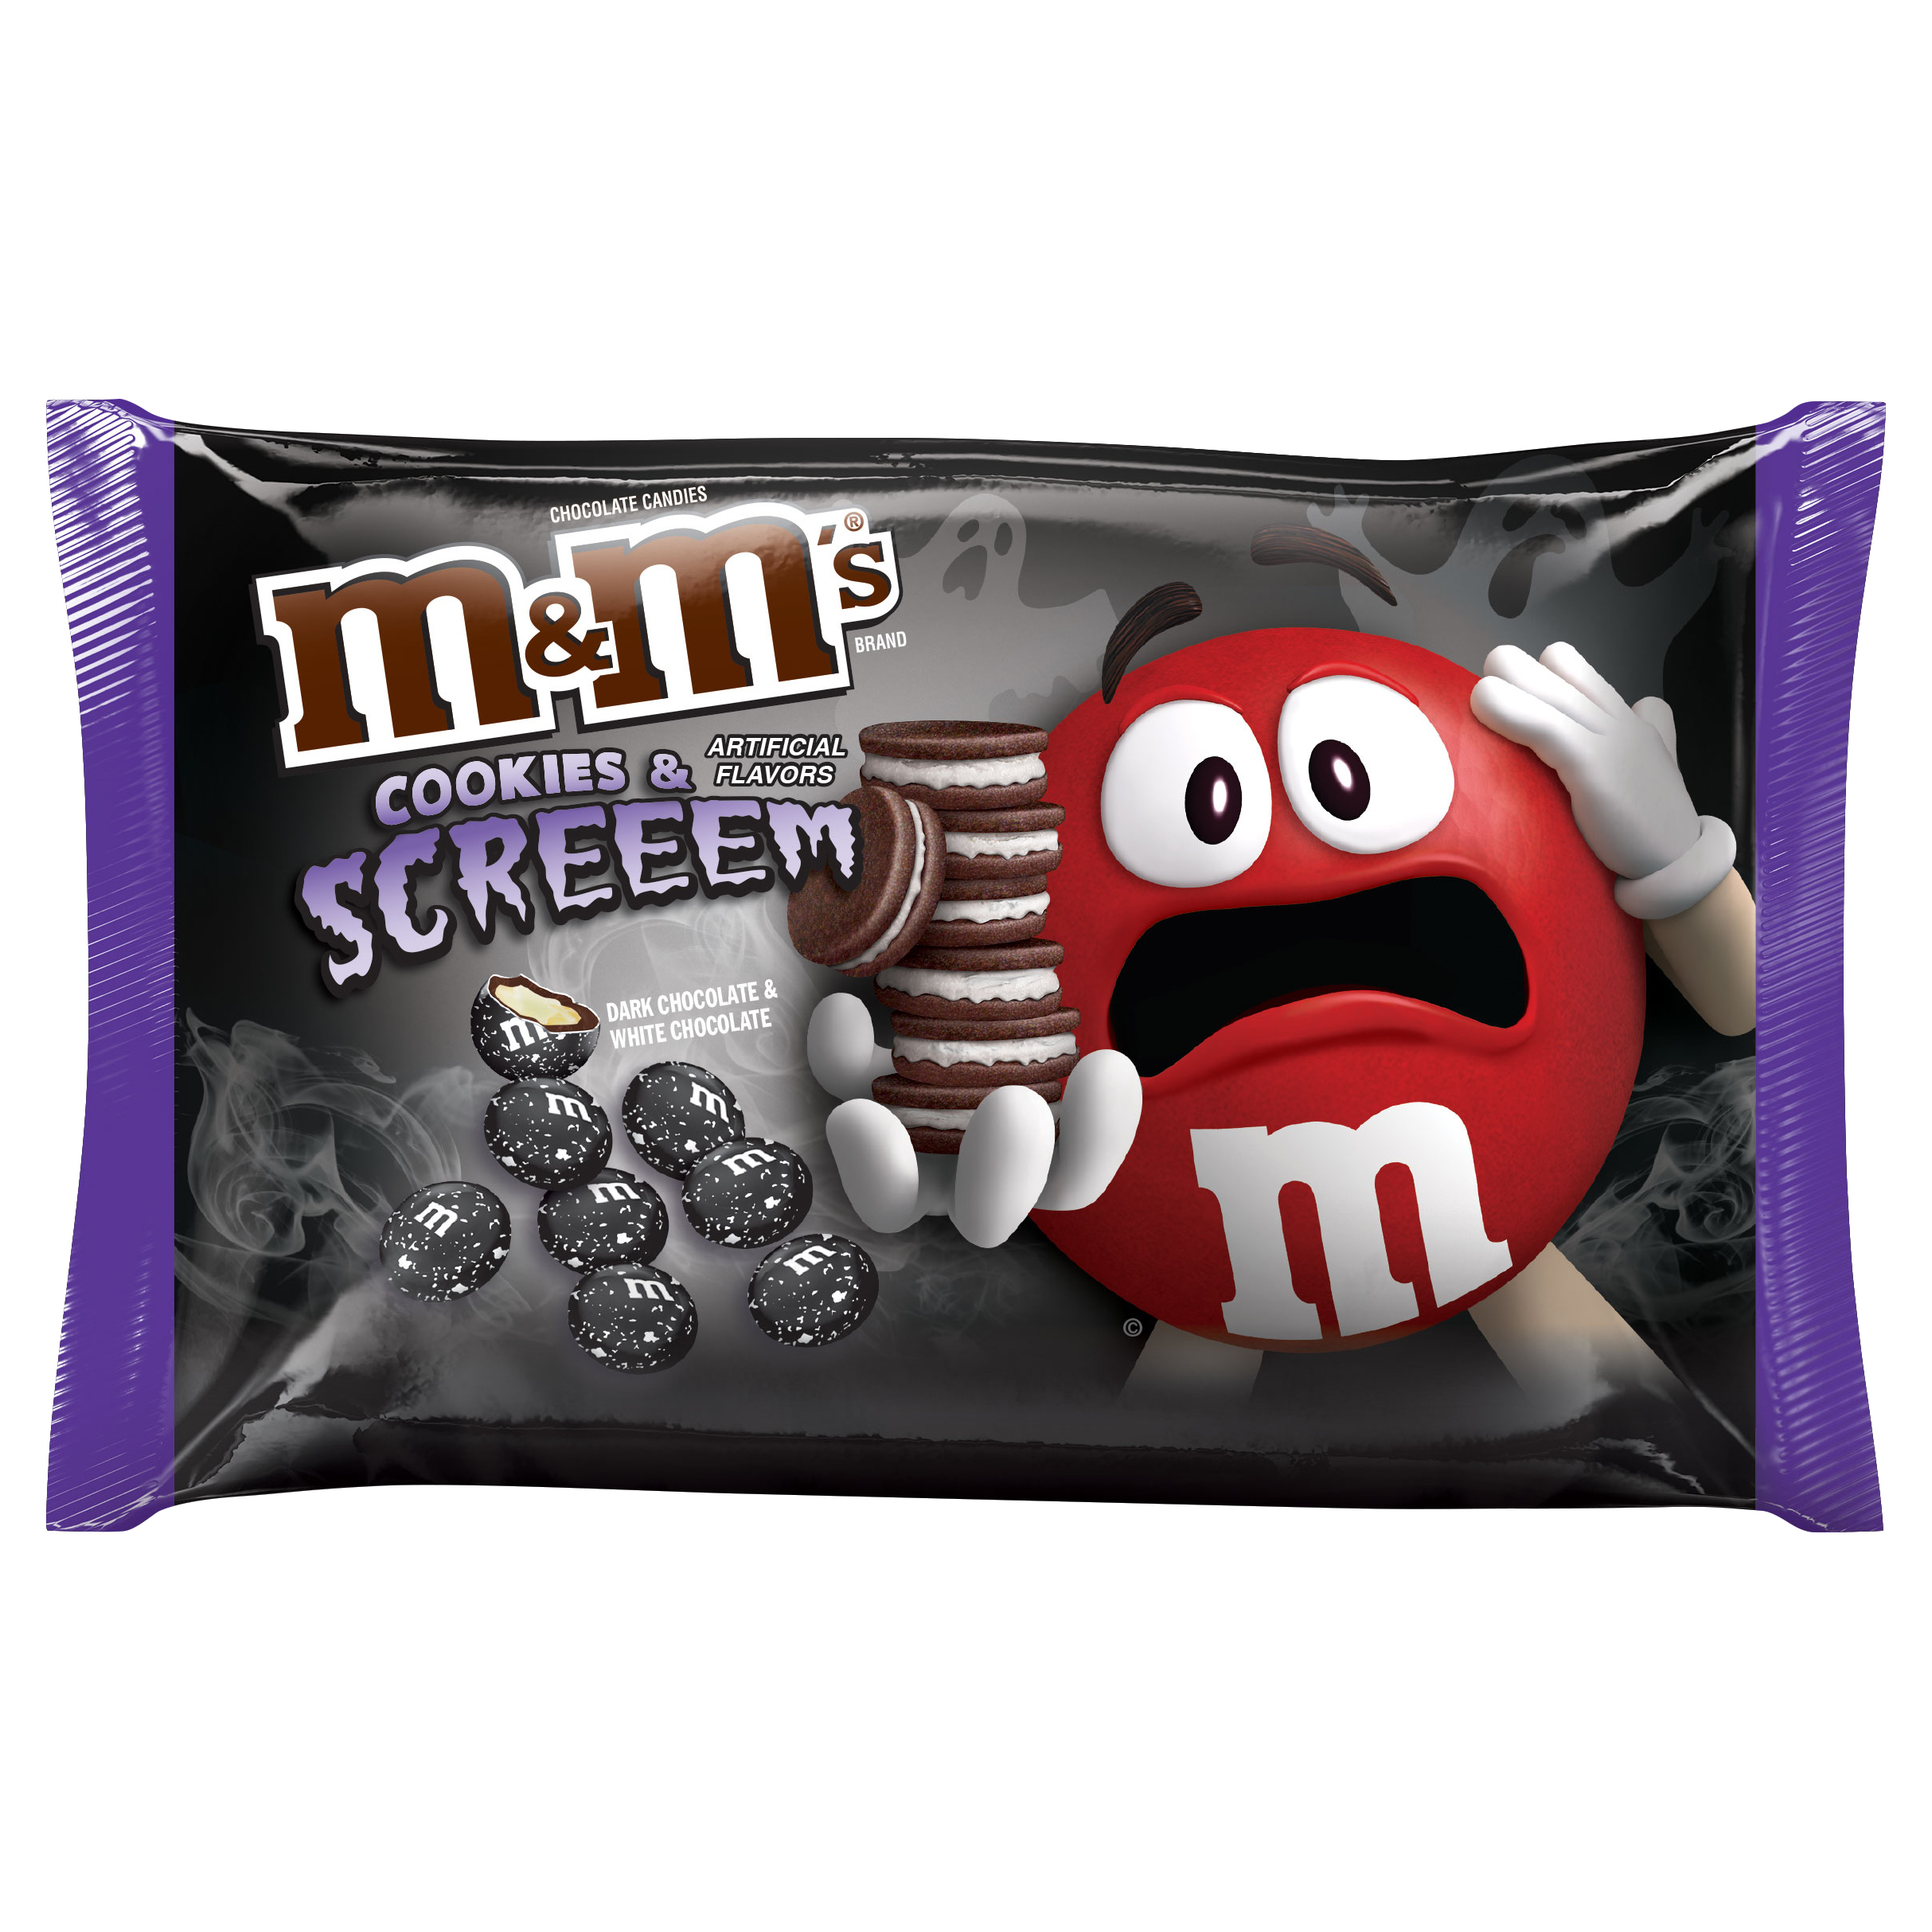 M&M's Introduces Cookie-Inspired Spooky Snack for Halloween